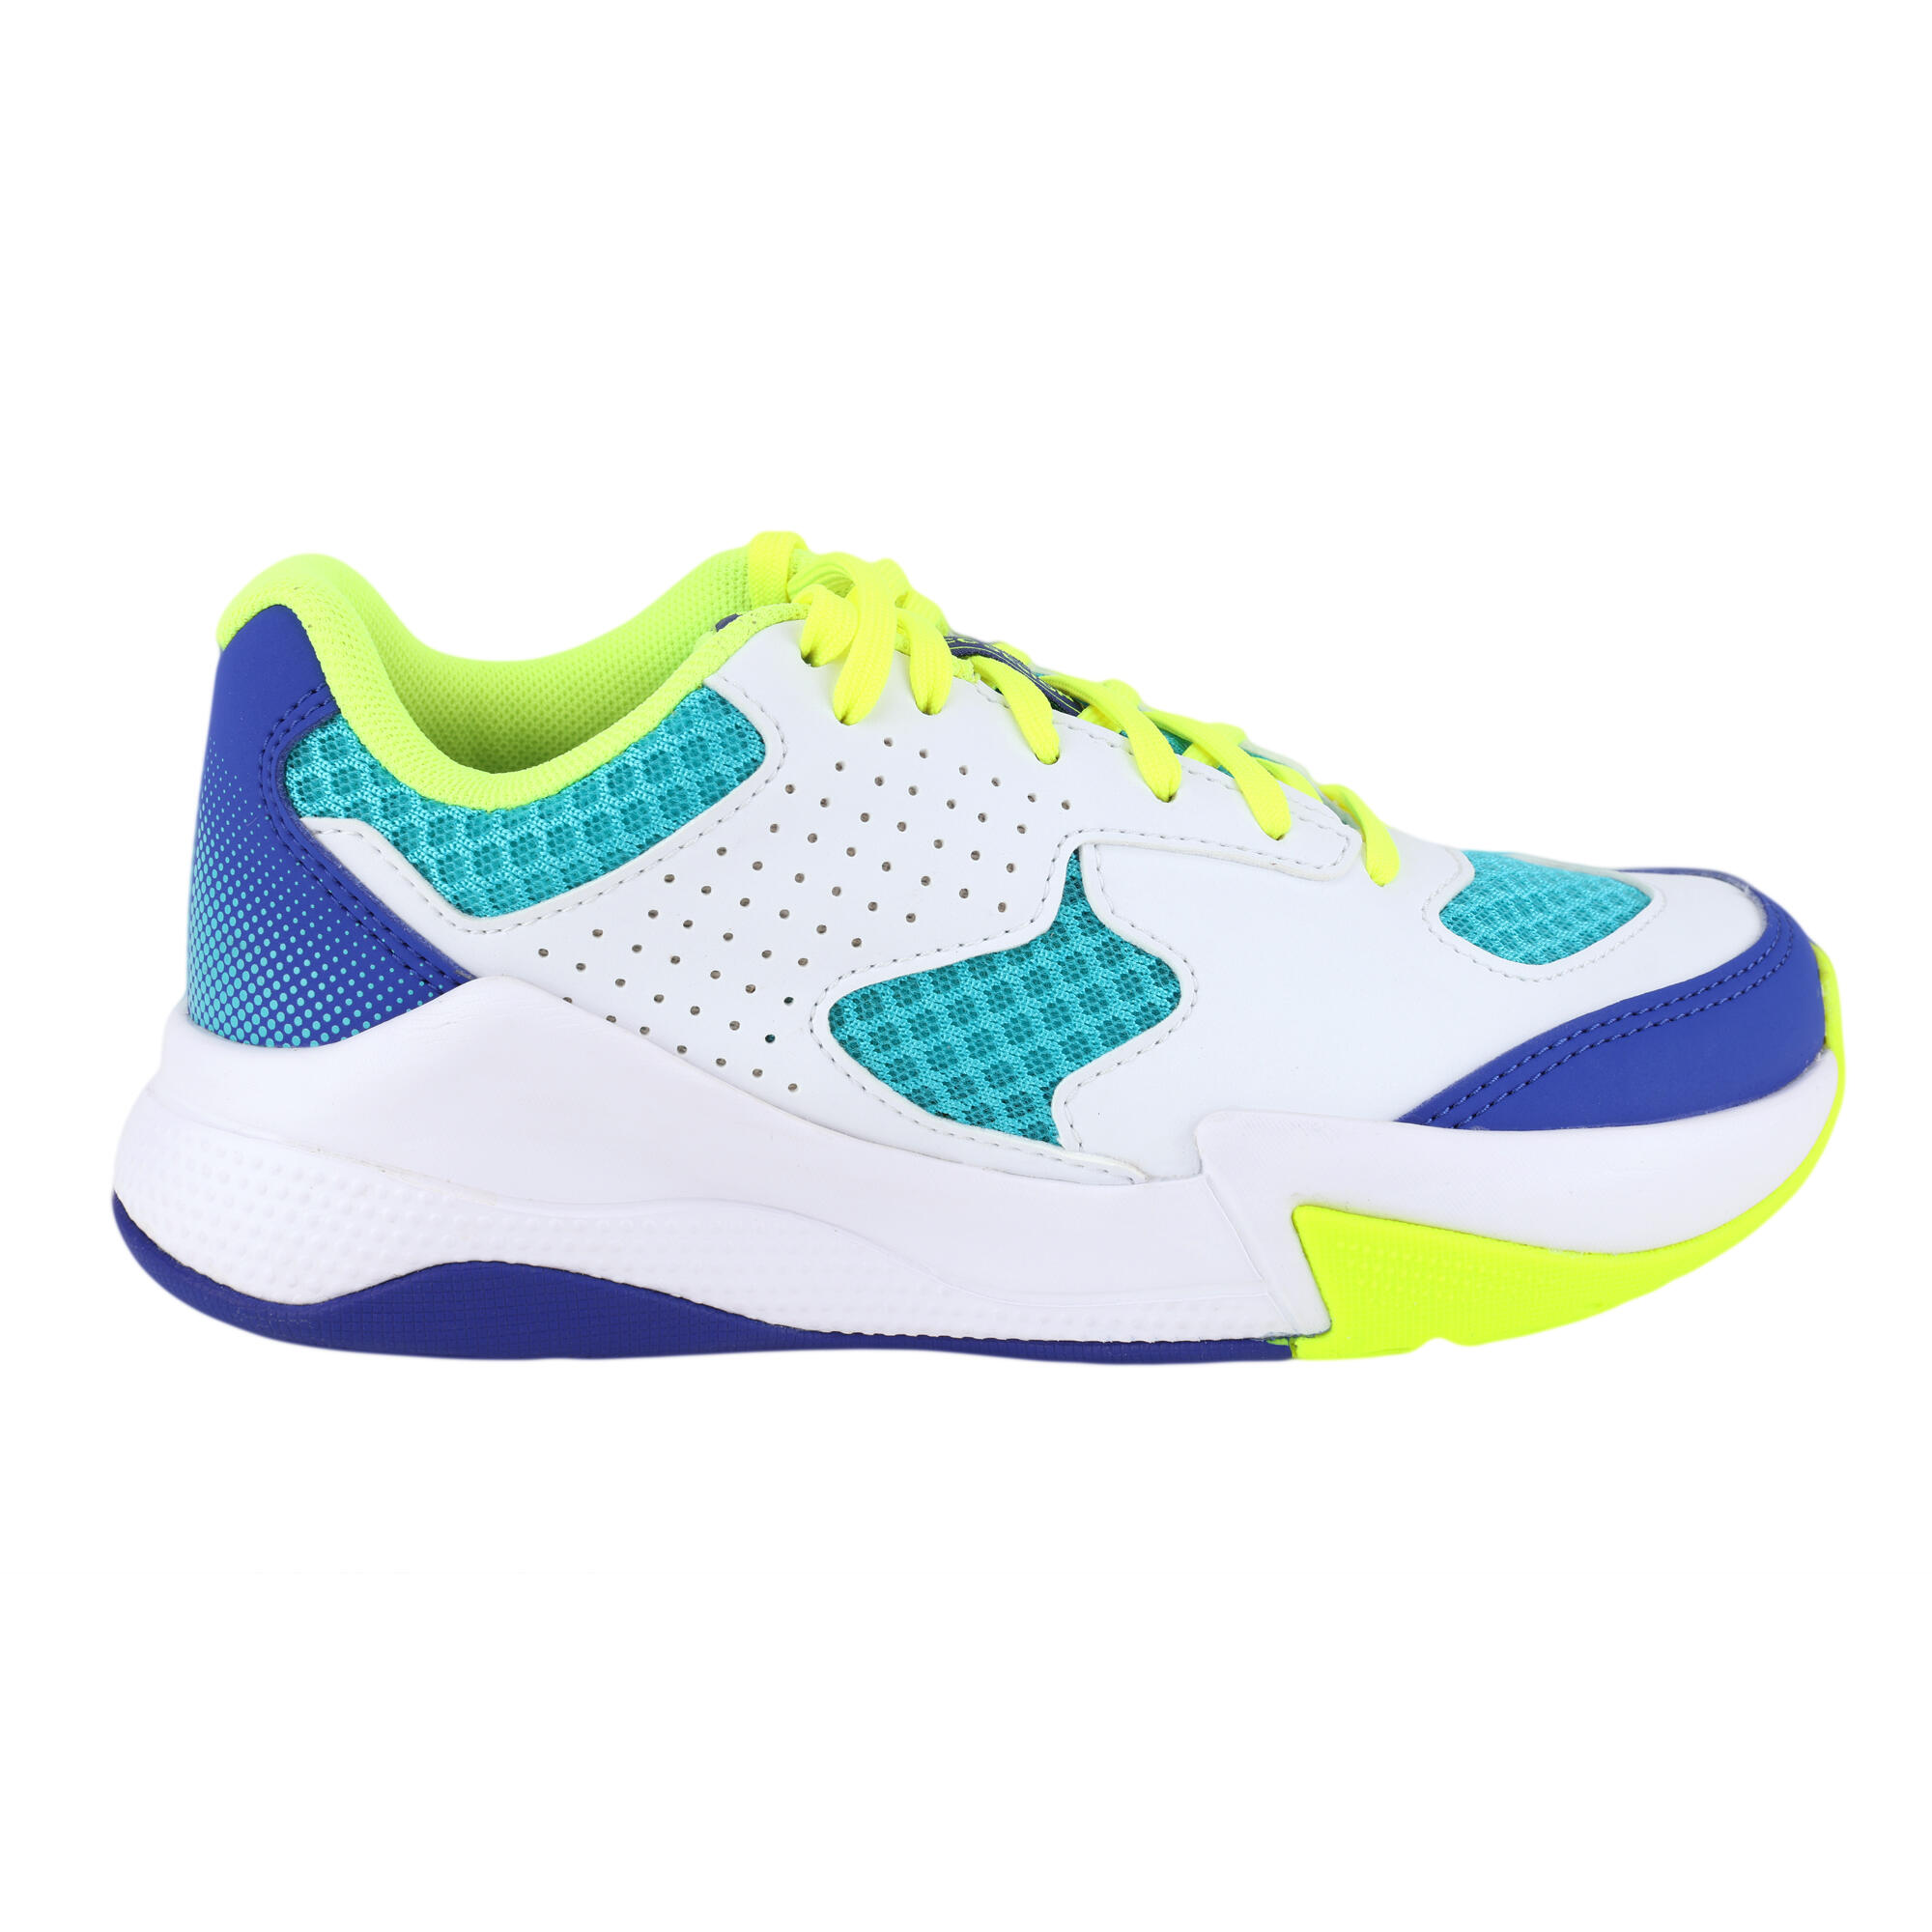 Volleyball Shoes VS100 Comfort With Laces - White/Blue & Green. 2/4